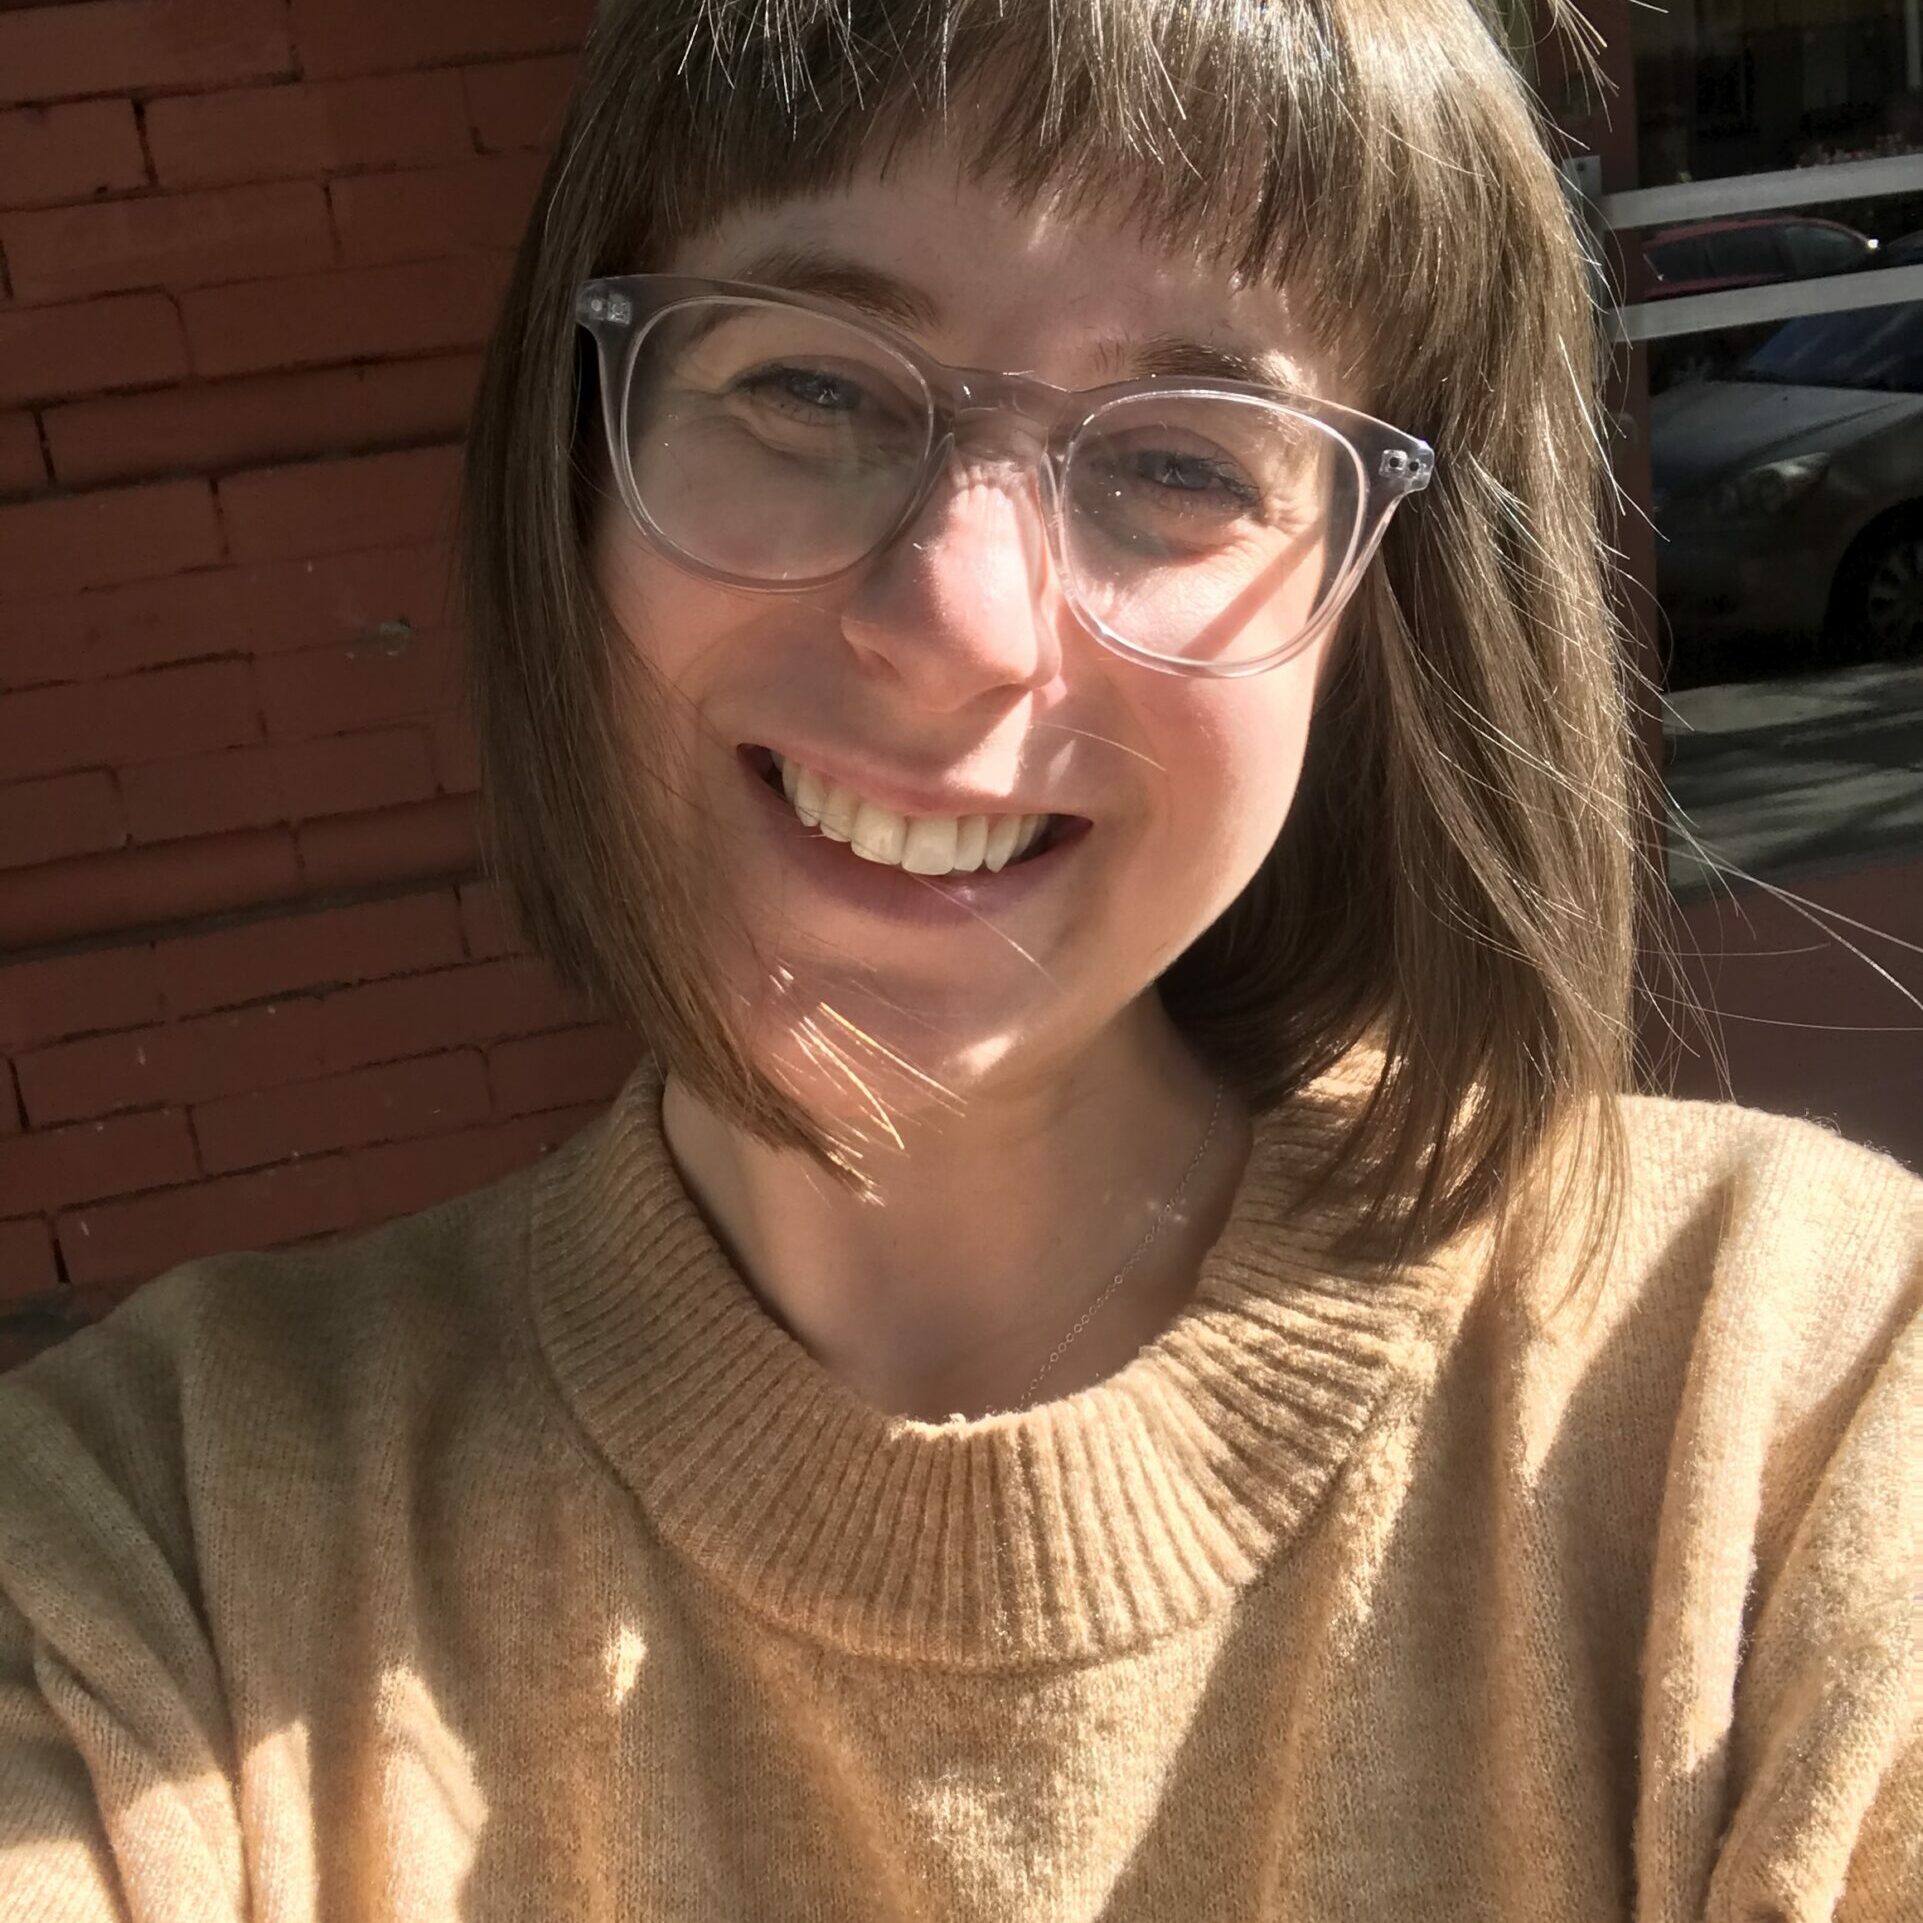 Image of white woman smiling with clear glasses and shoulder length light brown hair wearing a tan sweater. She is outside sunlights is hitting her face.